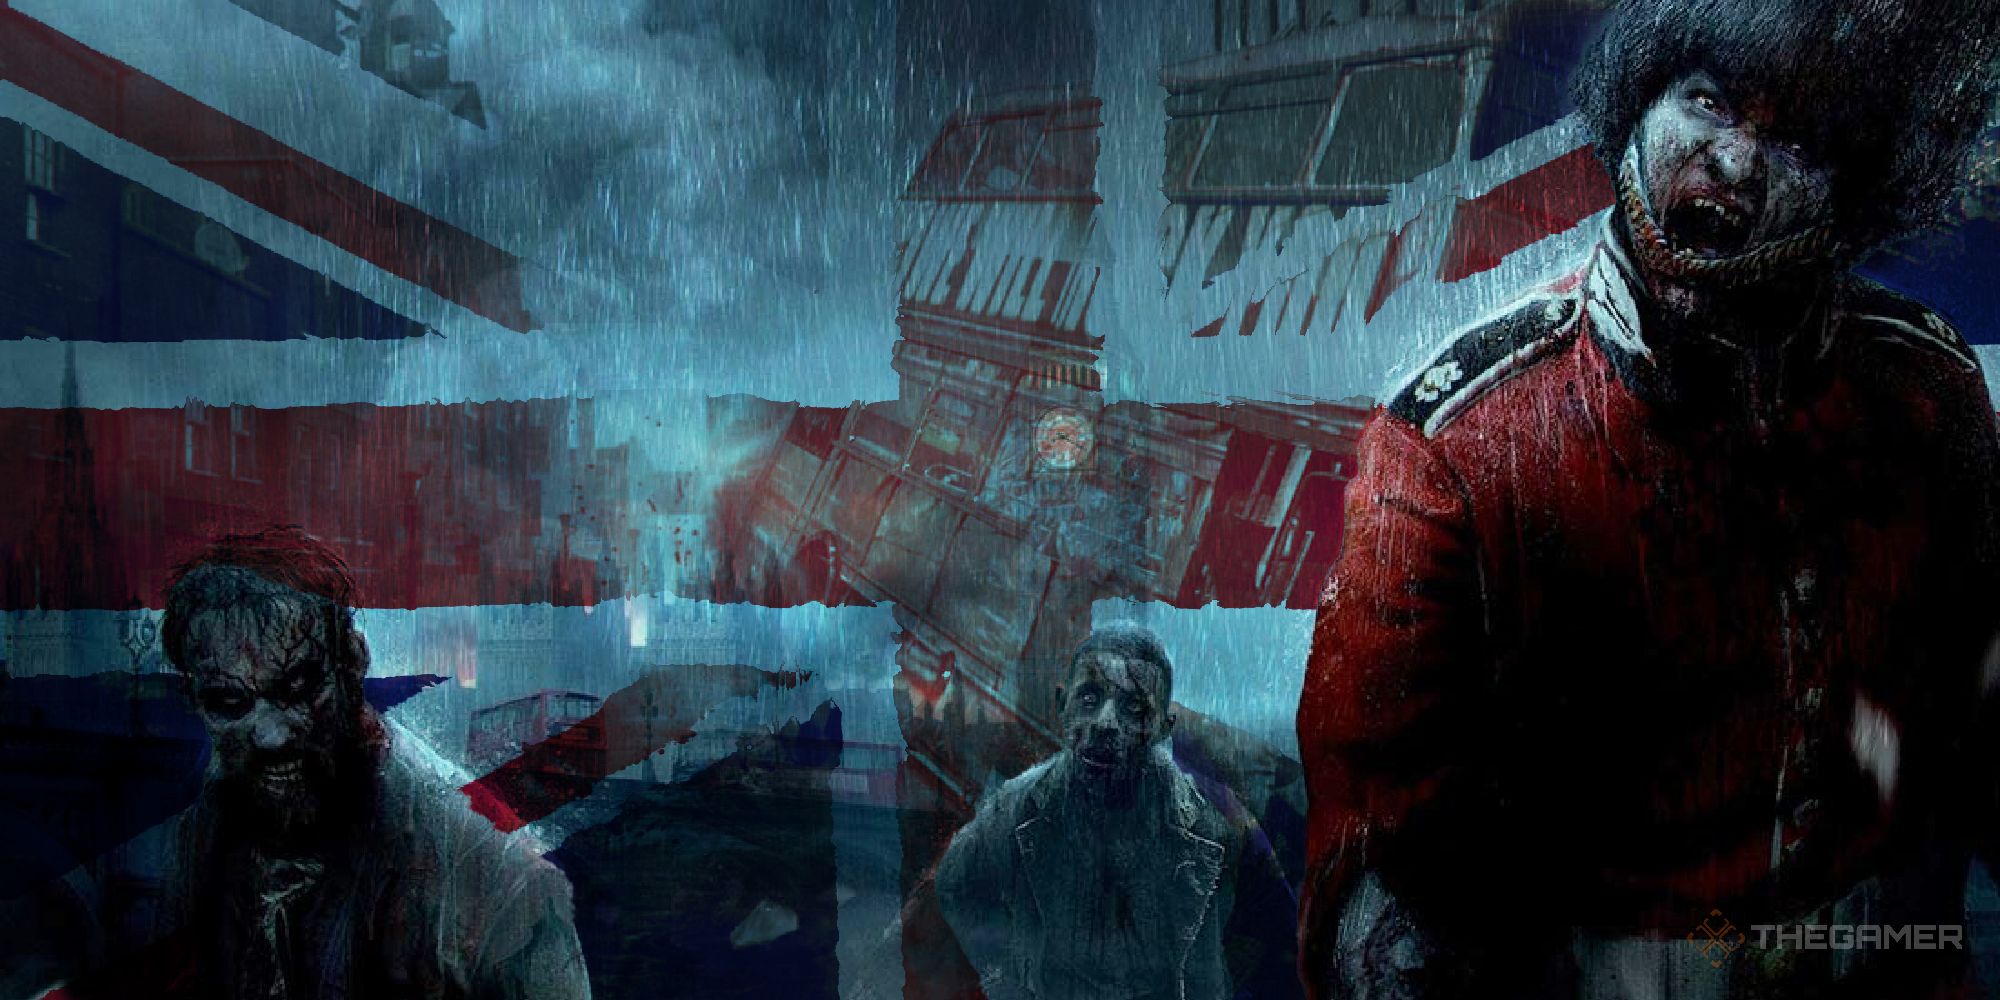 ZombiU to relaunch as Zombi later this year